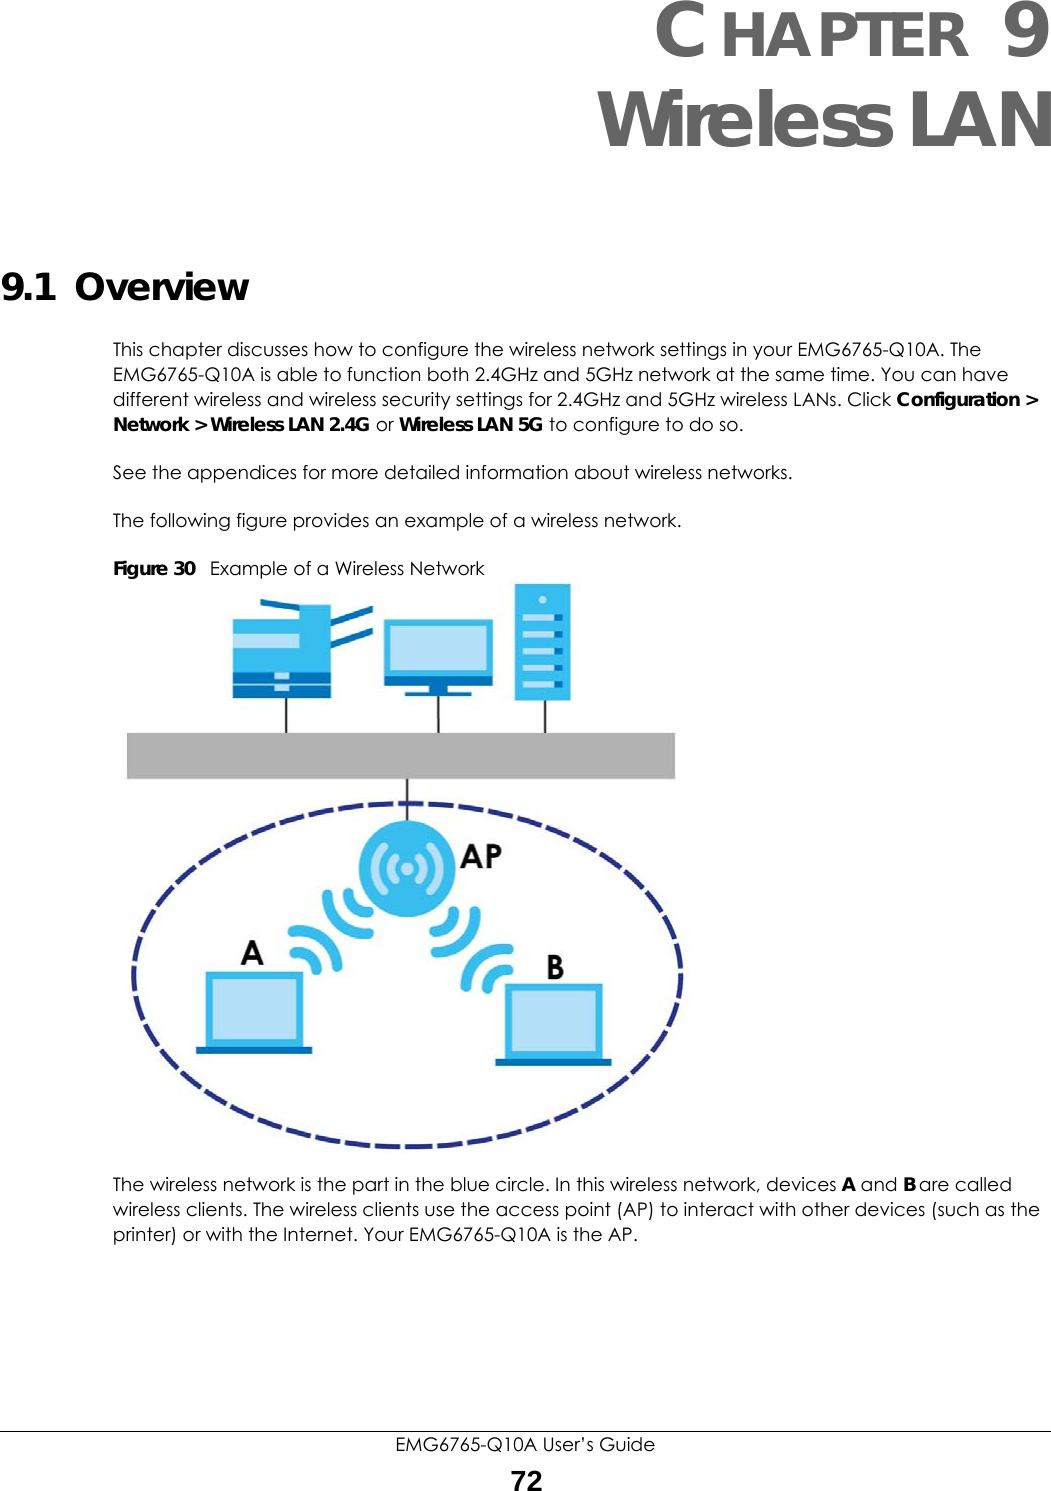 EMG6765-Q10A User’s Guide72CHAPTER 9Wireless LAN9.1  OverviewThis chapter discusses how to configure the wireless network settings in your EMG6765-Q10A. The EMG6765-Q10A is able to function both 2.4GHz and 5GHz network at the same time. You can have different wireless and wireless security settings for 2.4GHz and 5GHz wireless LANs. Click Configuration &gt; Network &gt; Wireless LAN 2.4G or Wireless LAN 5G to configure to do so.See the appendices for more detailed information about wireless networks.The following figure provides an example of a wireless network.Figure 30   Example of a Wireless NetworkThe wireless network is the part in the blue circle. In this wireless network, devices A and B are called wireless clients. The wireless clients use the access point (AP) to interact with other devices (such as the printer) or with the Internet. Your EMG6765-Q10A is the AP.